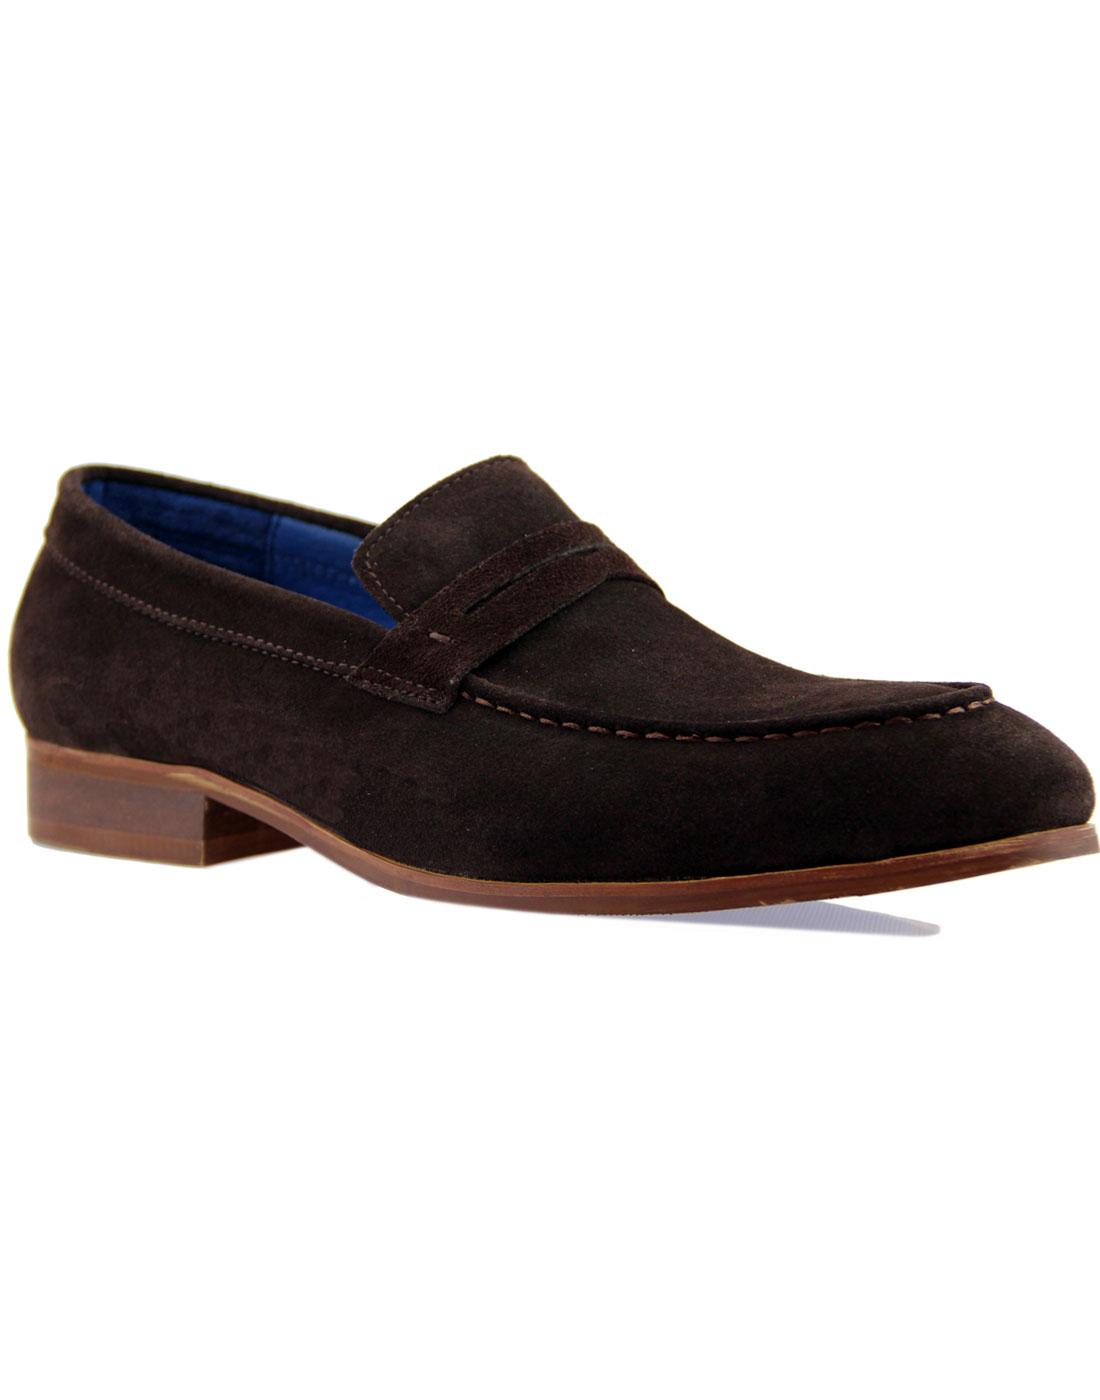 Travon PAOLO VANDINI Mod Suede Penny Loafers (CB)